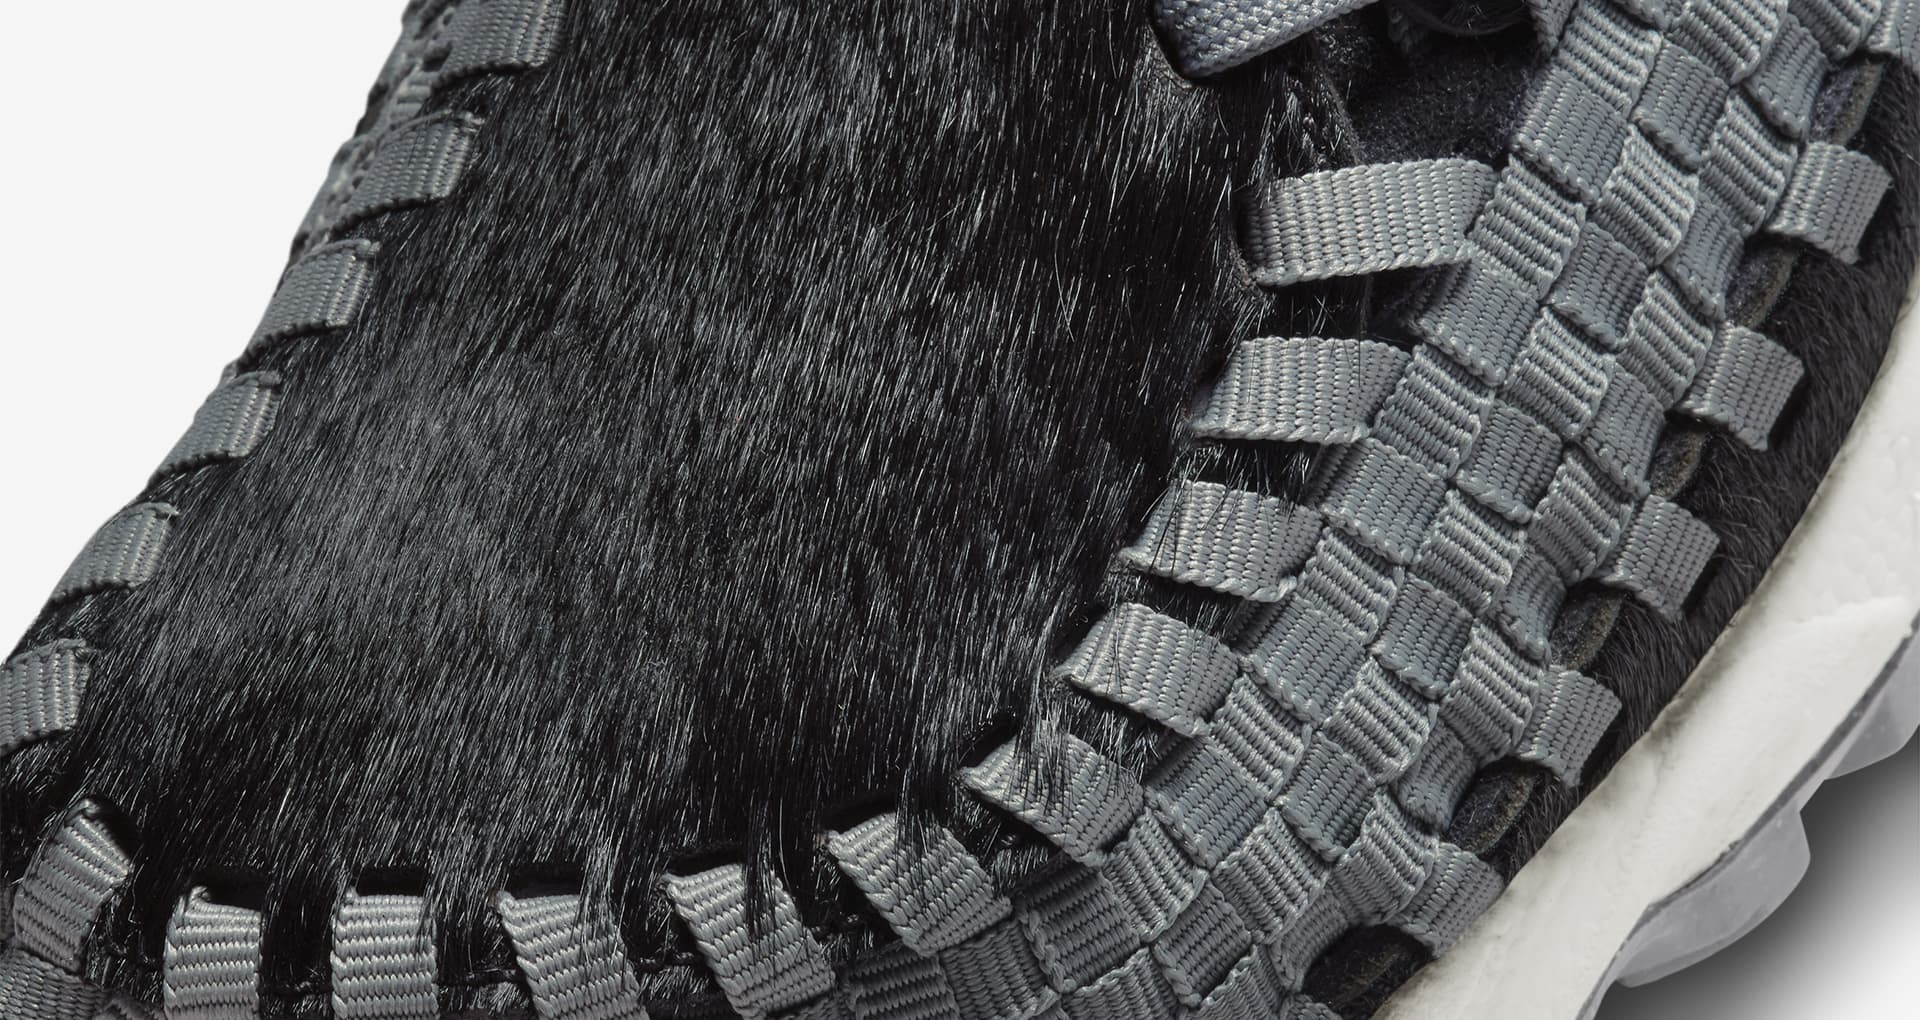 Air Footscape Woven 'Black and Smoke Grey' (FB1959-001) release date ...